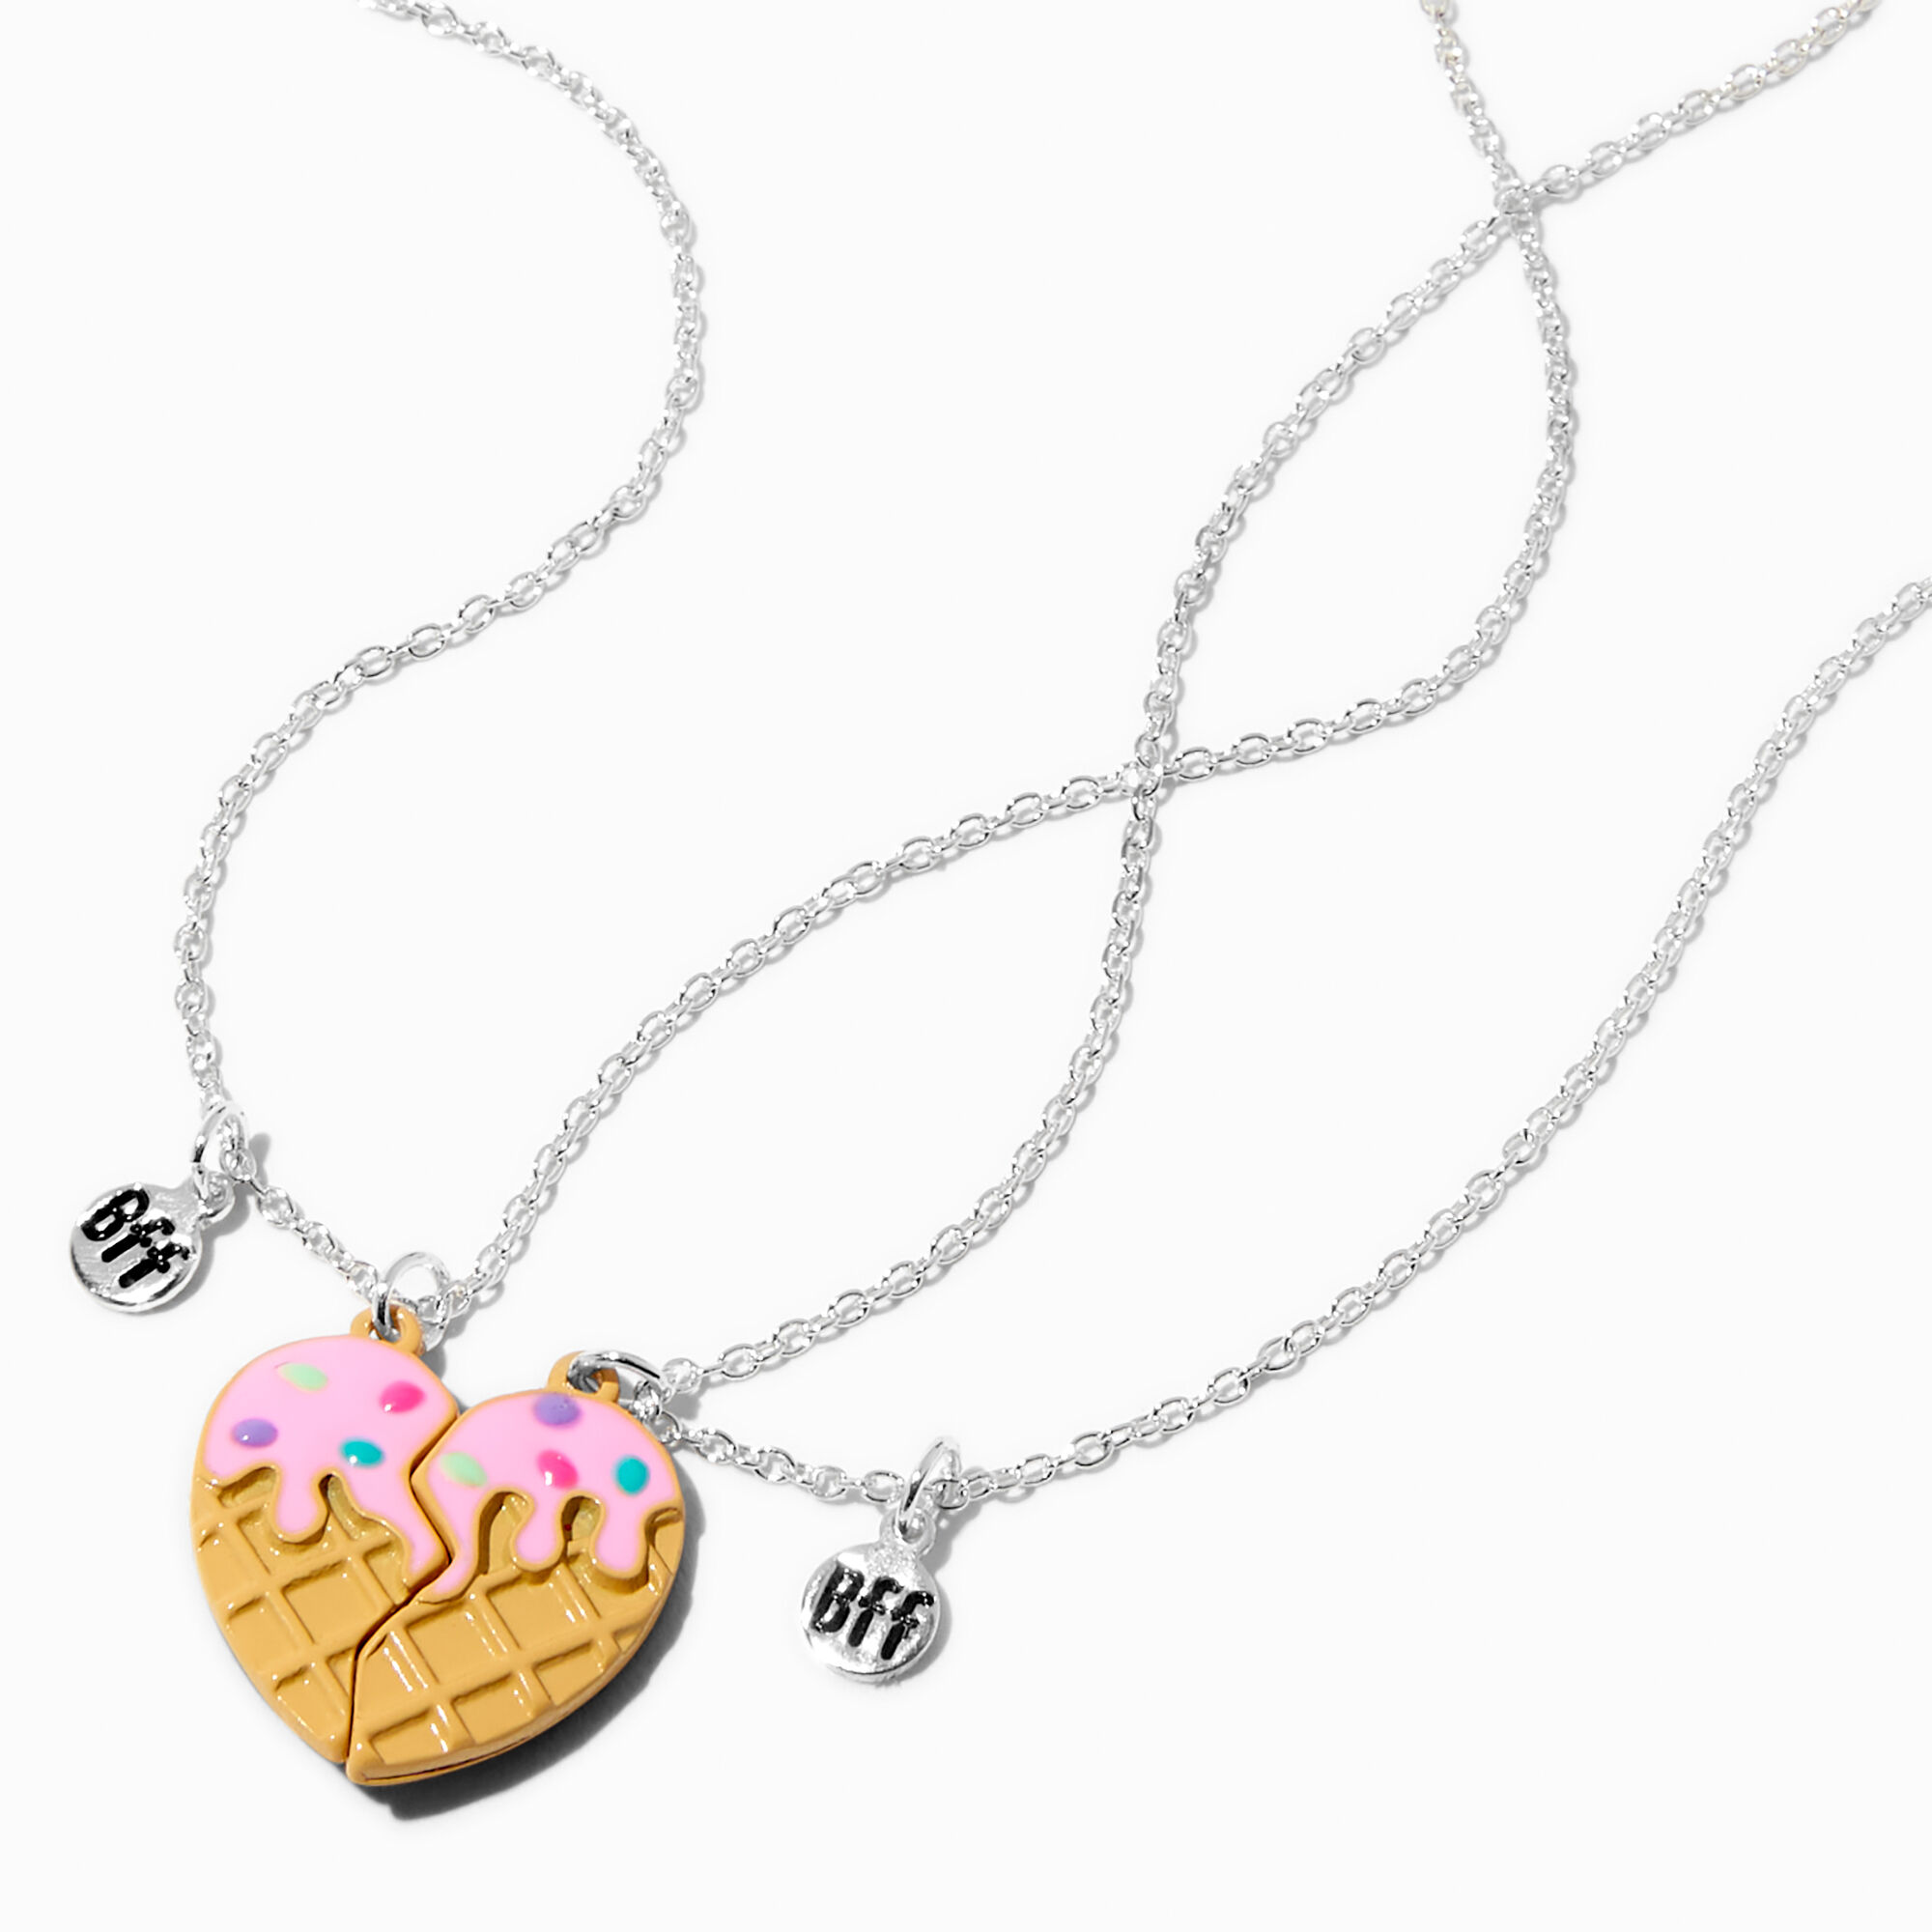 View Claires Best Friends Ice Cream Cone Heart Pendant Necklaces 2 Pack Pink information